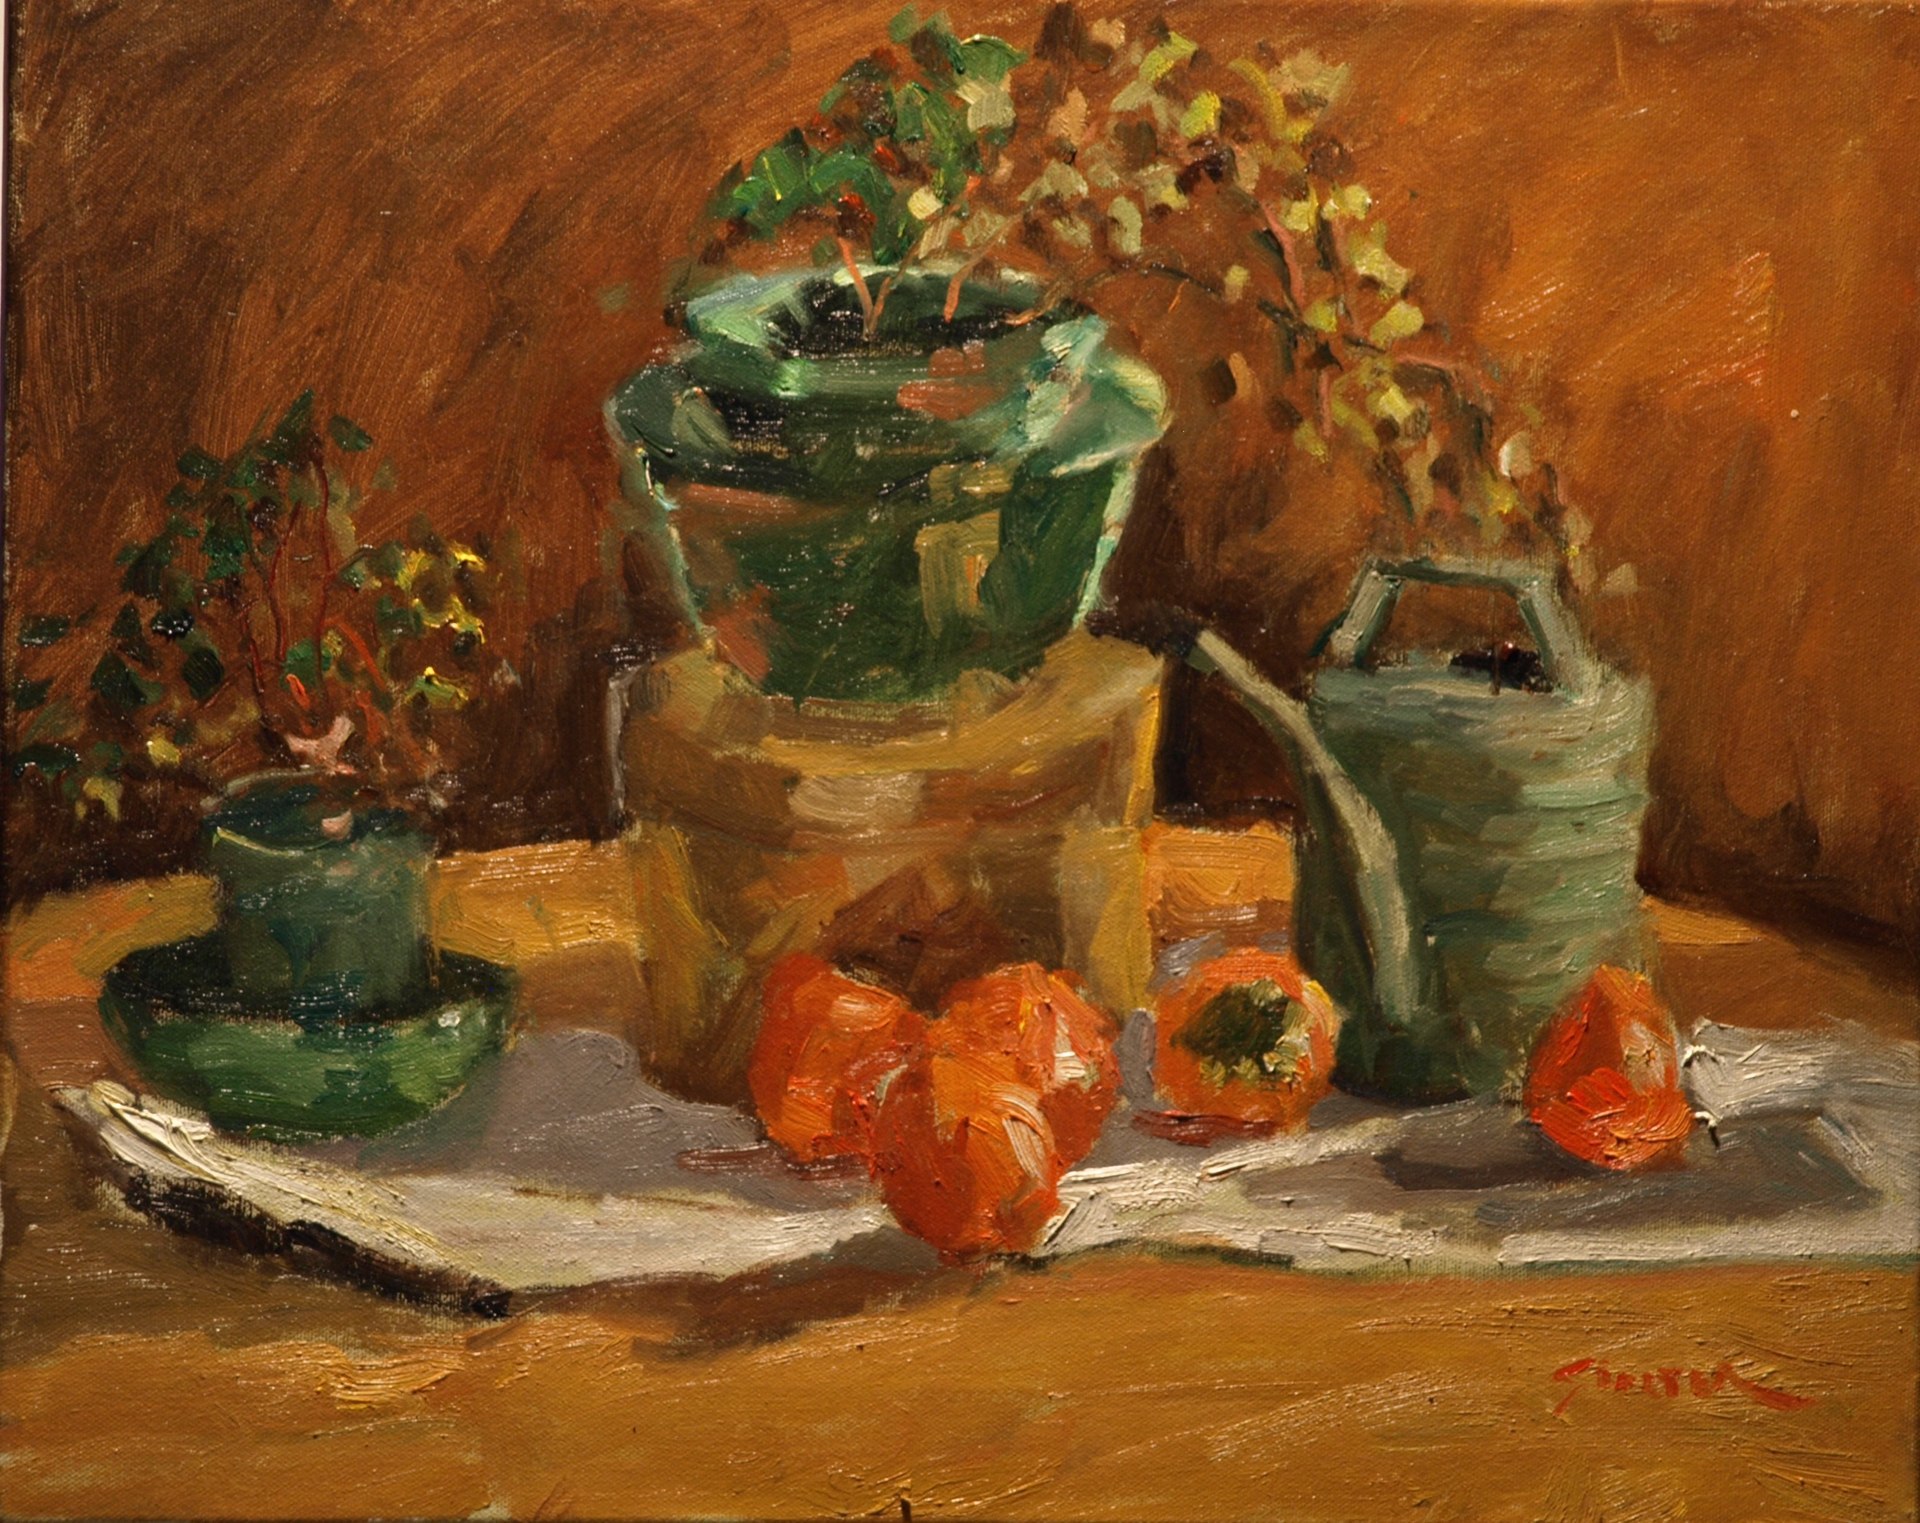 Still Life with Persimmons, Oil on Canvas, 16 x 20 Inches, by Richard Stalter, $425